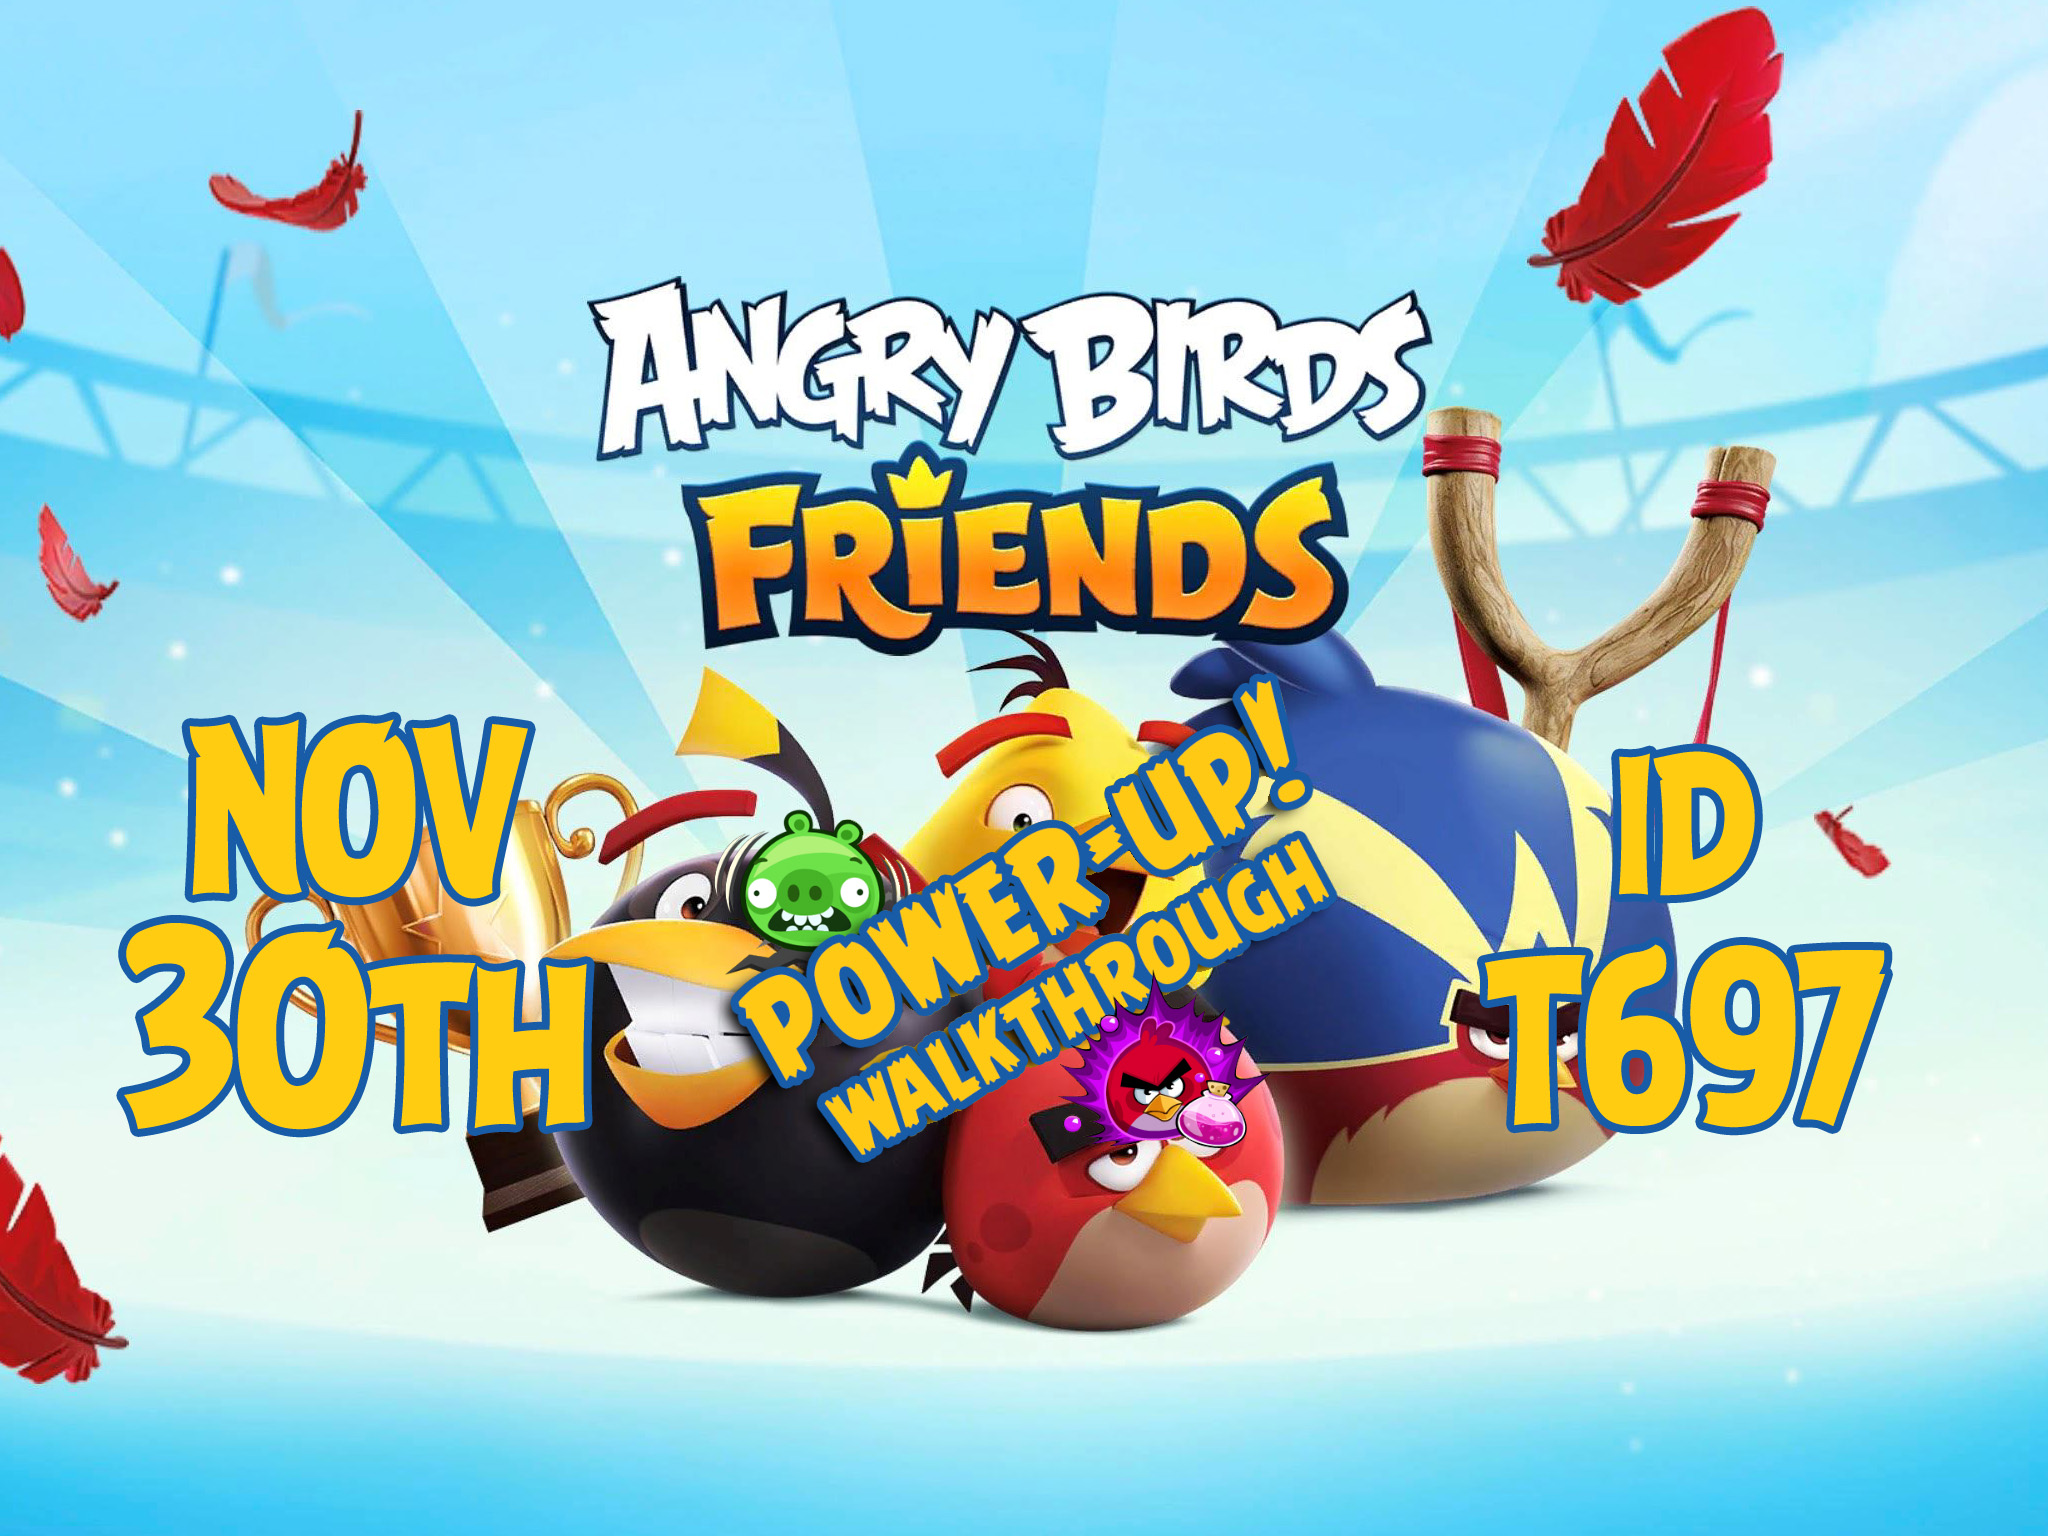 Angry-Birds-Friends-Tournament-T697-Feature-Image-PU